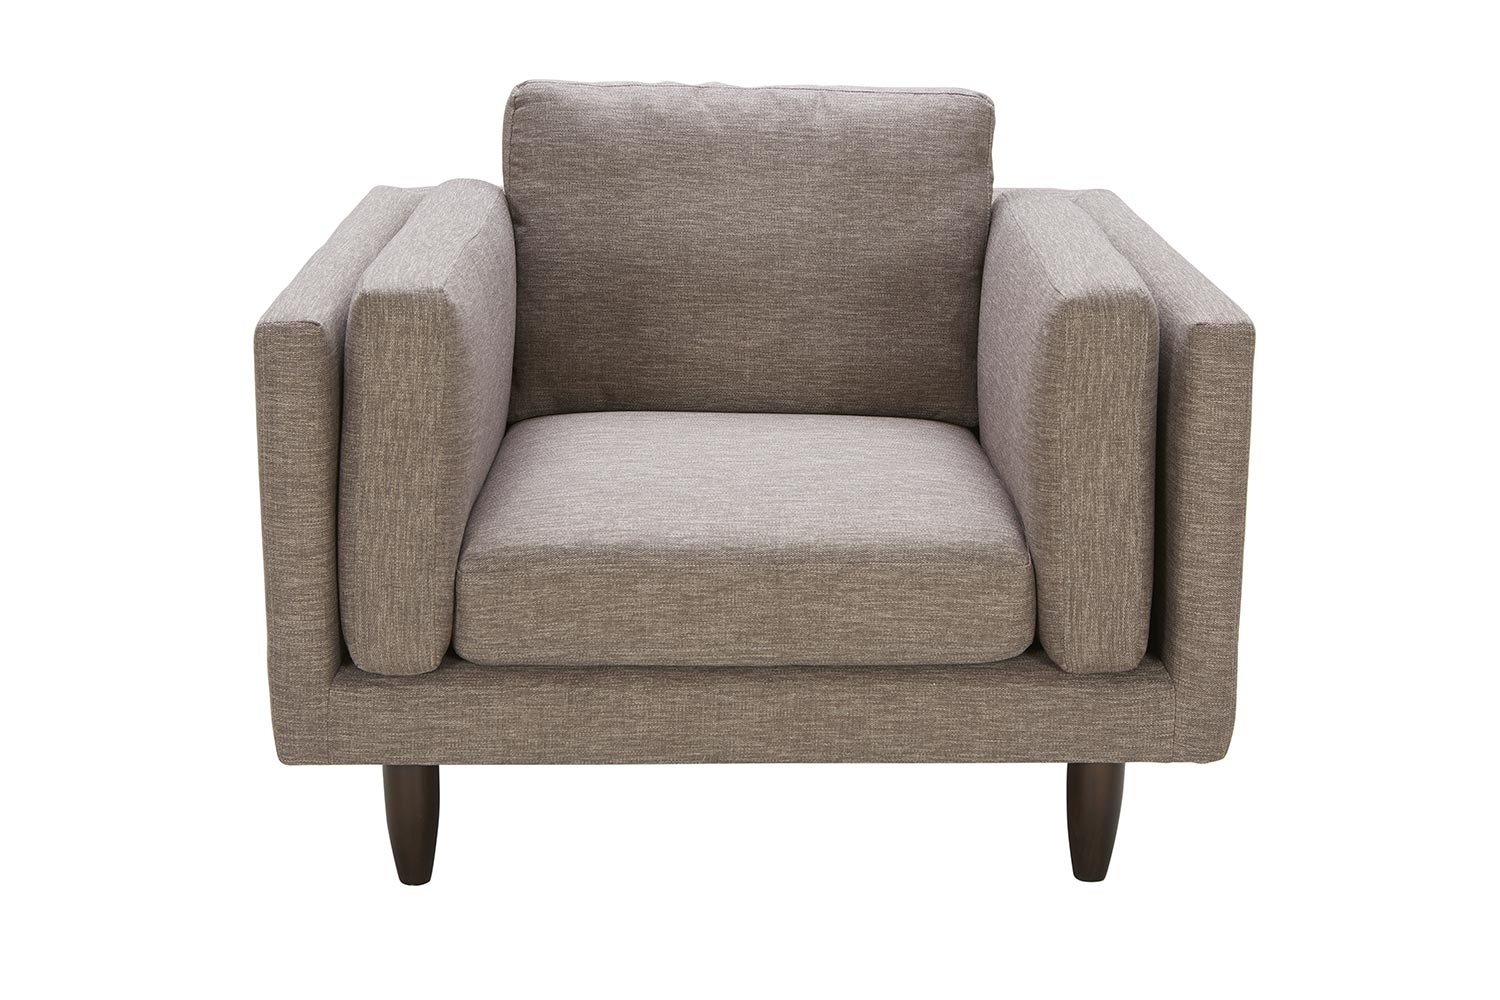 ELEMENTS Fine Home Furnishings Retro Fabric Standard Chair - Taupe